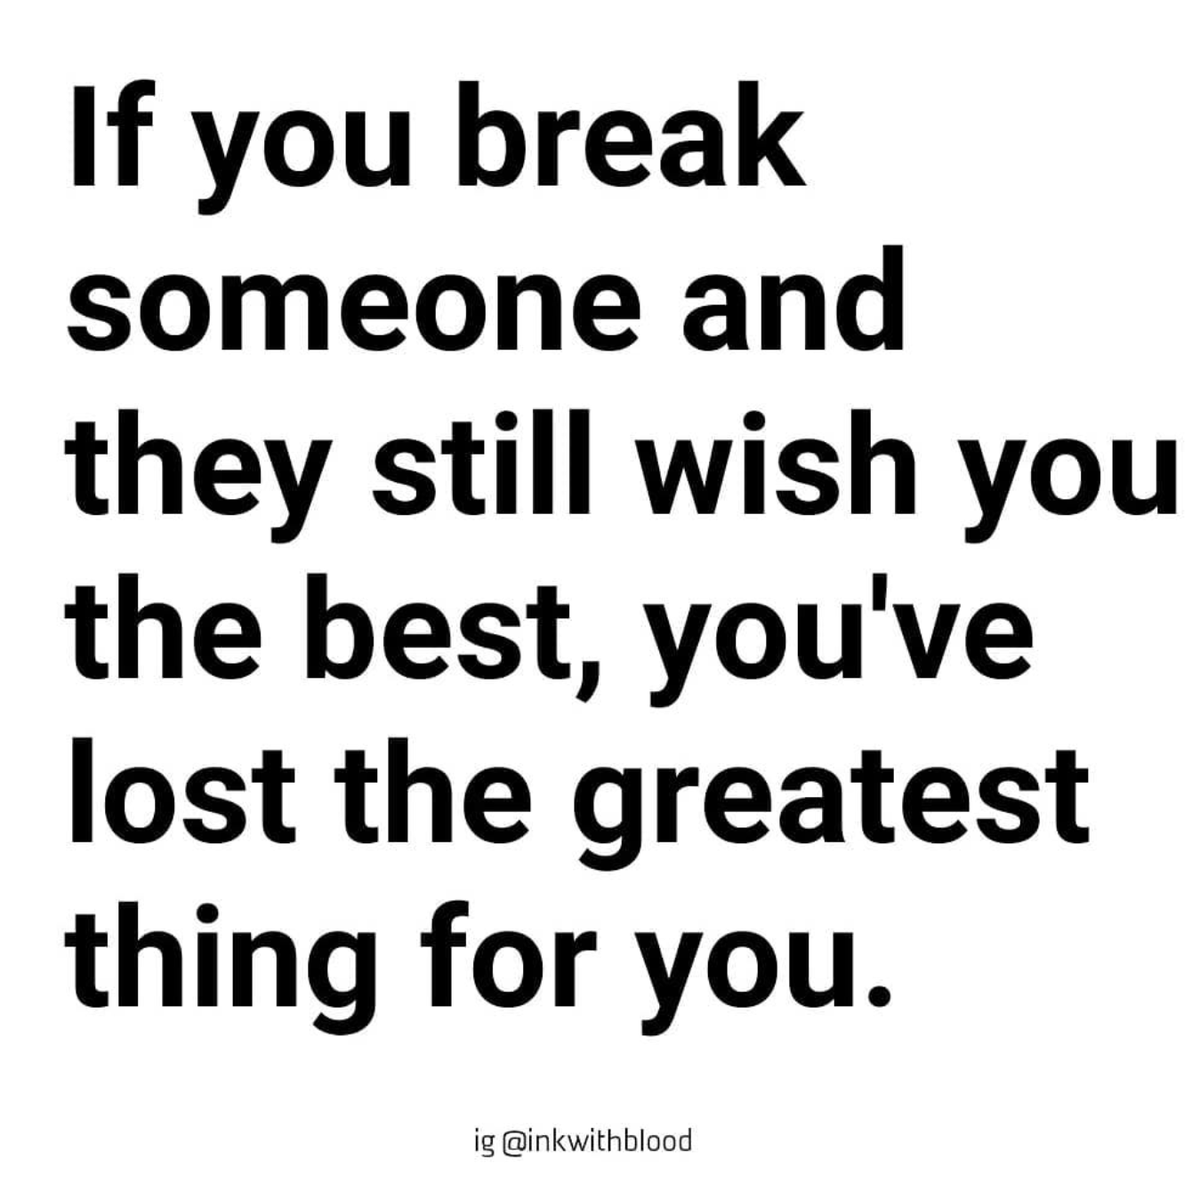 If you break someone and they still wish you the best, you've lost the greatest thing for you.
.
.
.
.
.
 #BreakupQuotes #CommunityOfPoets #CreativeWriting #DailyQuoted #ExQuotes #HealingQuotes #Hope #HurtQuotes #InspirationalQuotes #LettingGoQuotes #Promp bit.ly/3669HV8